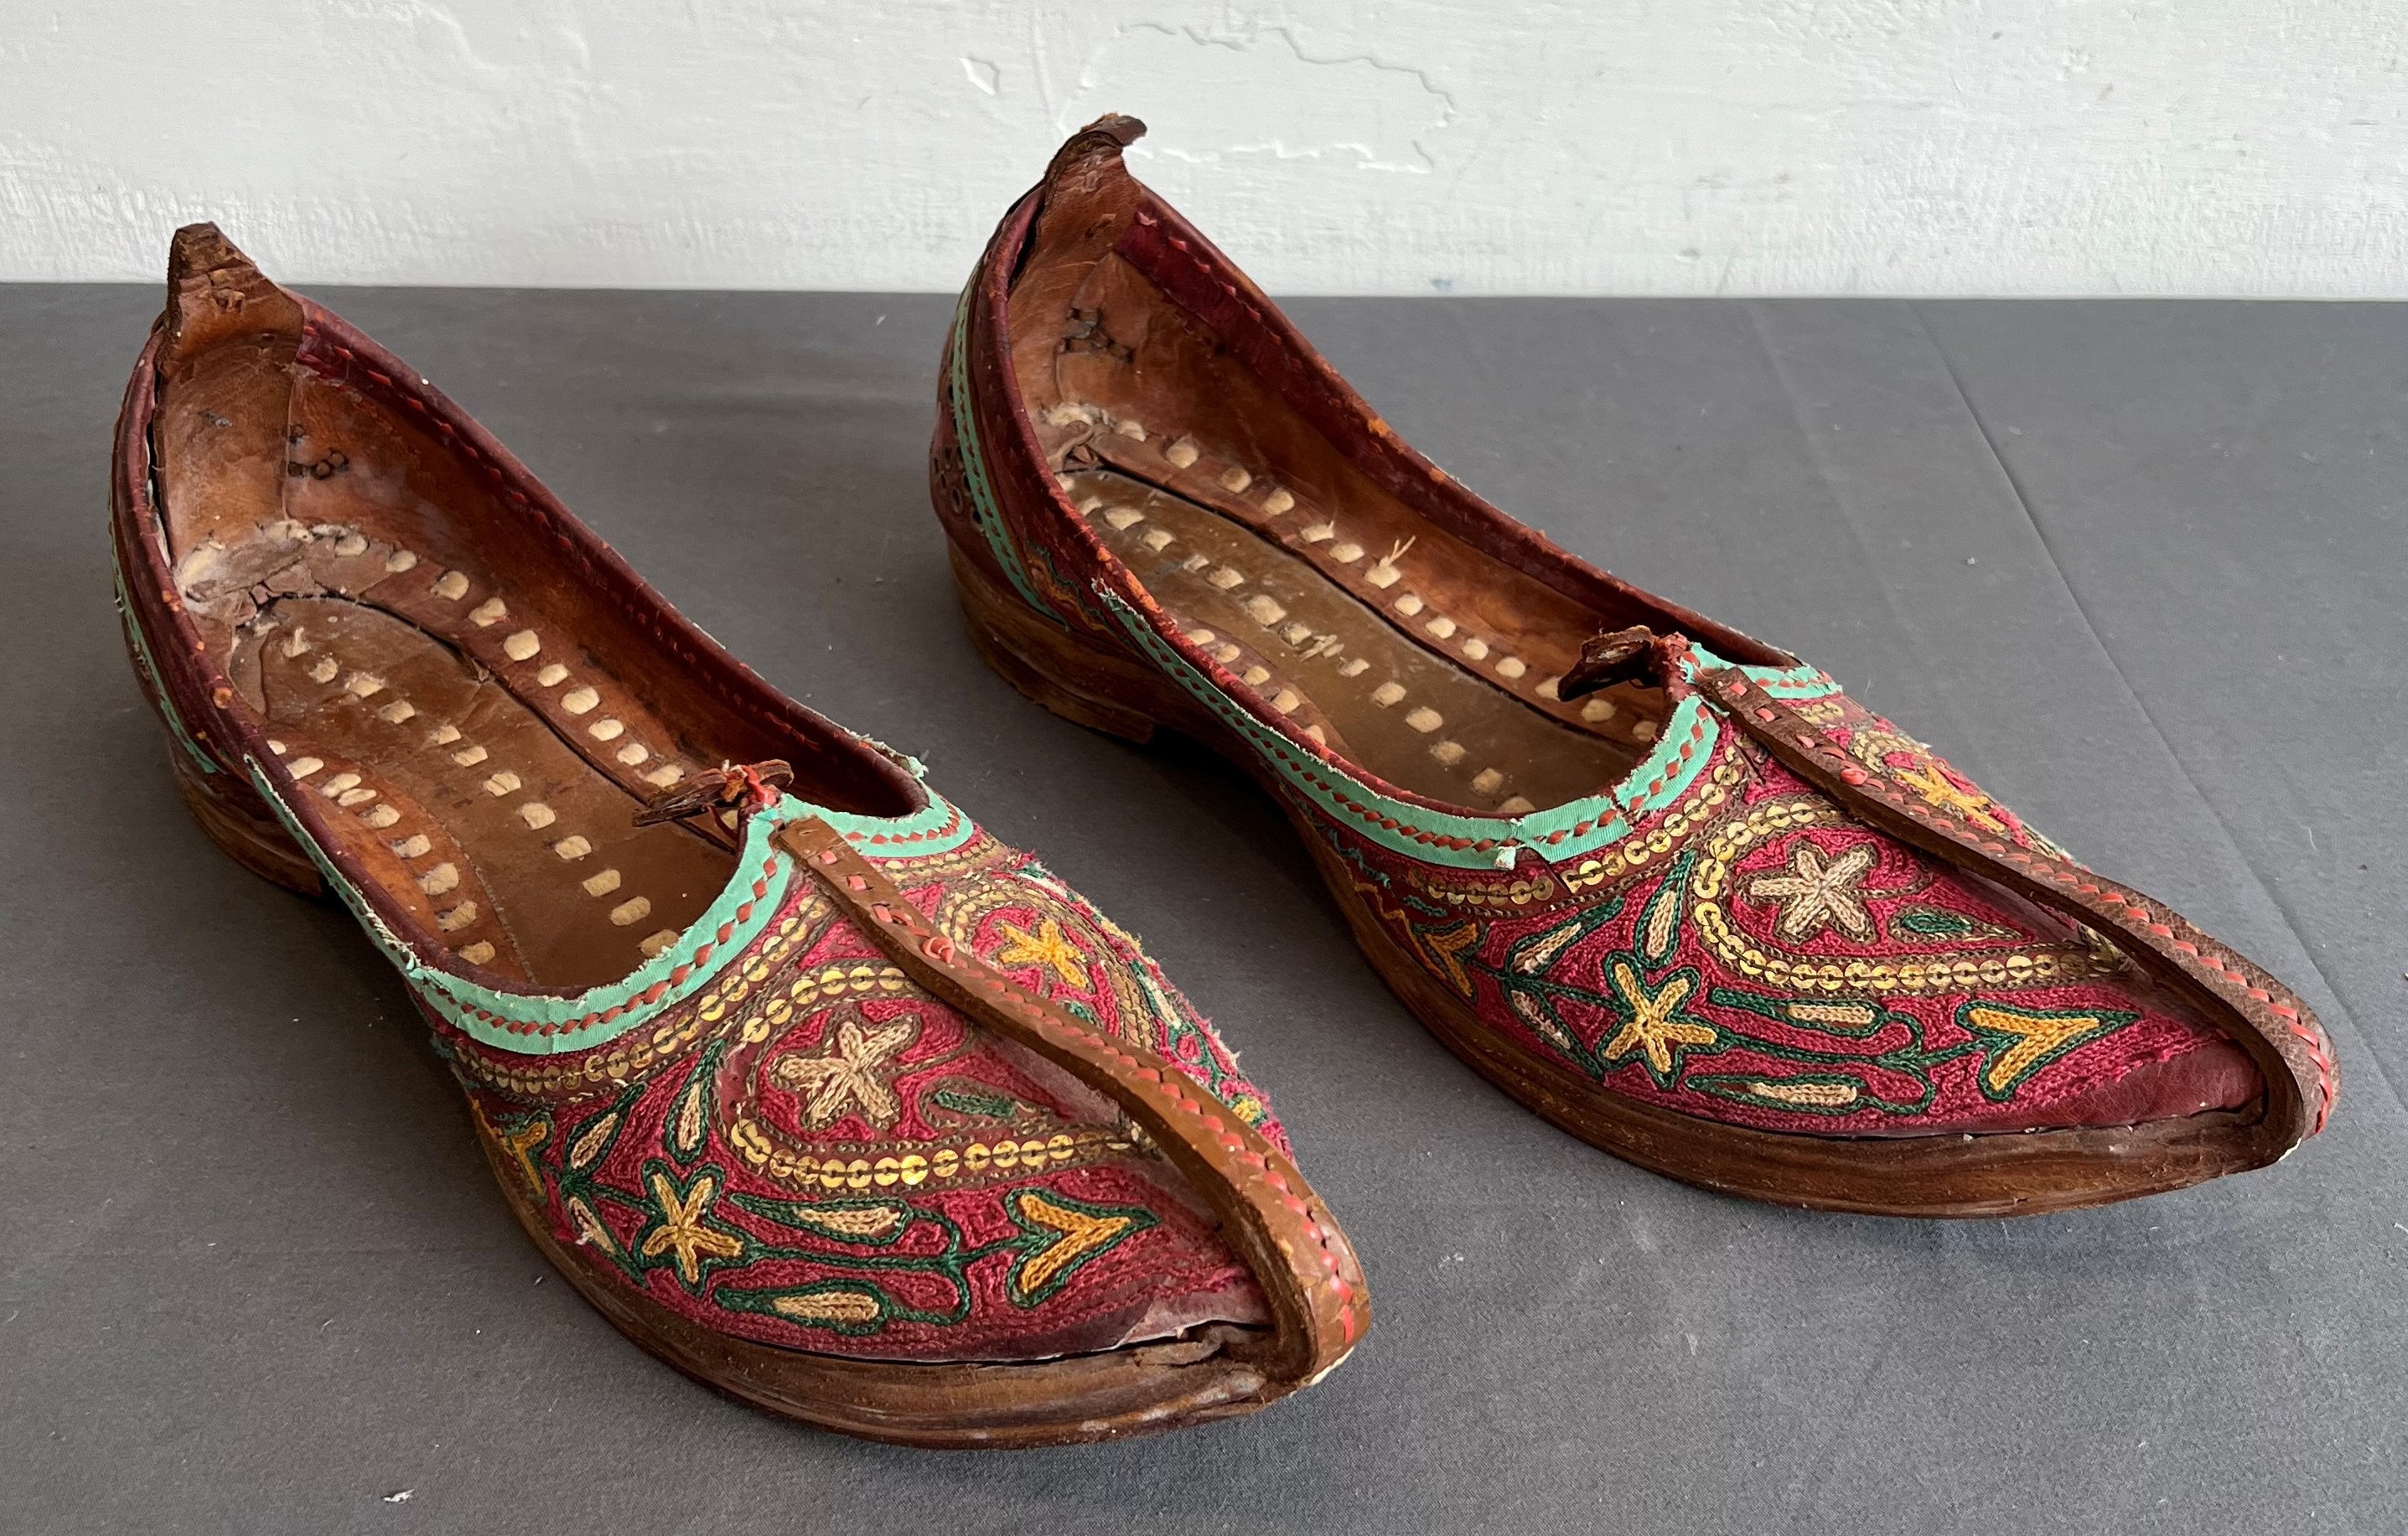 A fine pair of Turkish leather and silk embroidered gentleman's slippers - probably early 20th